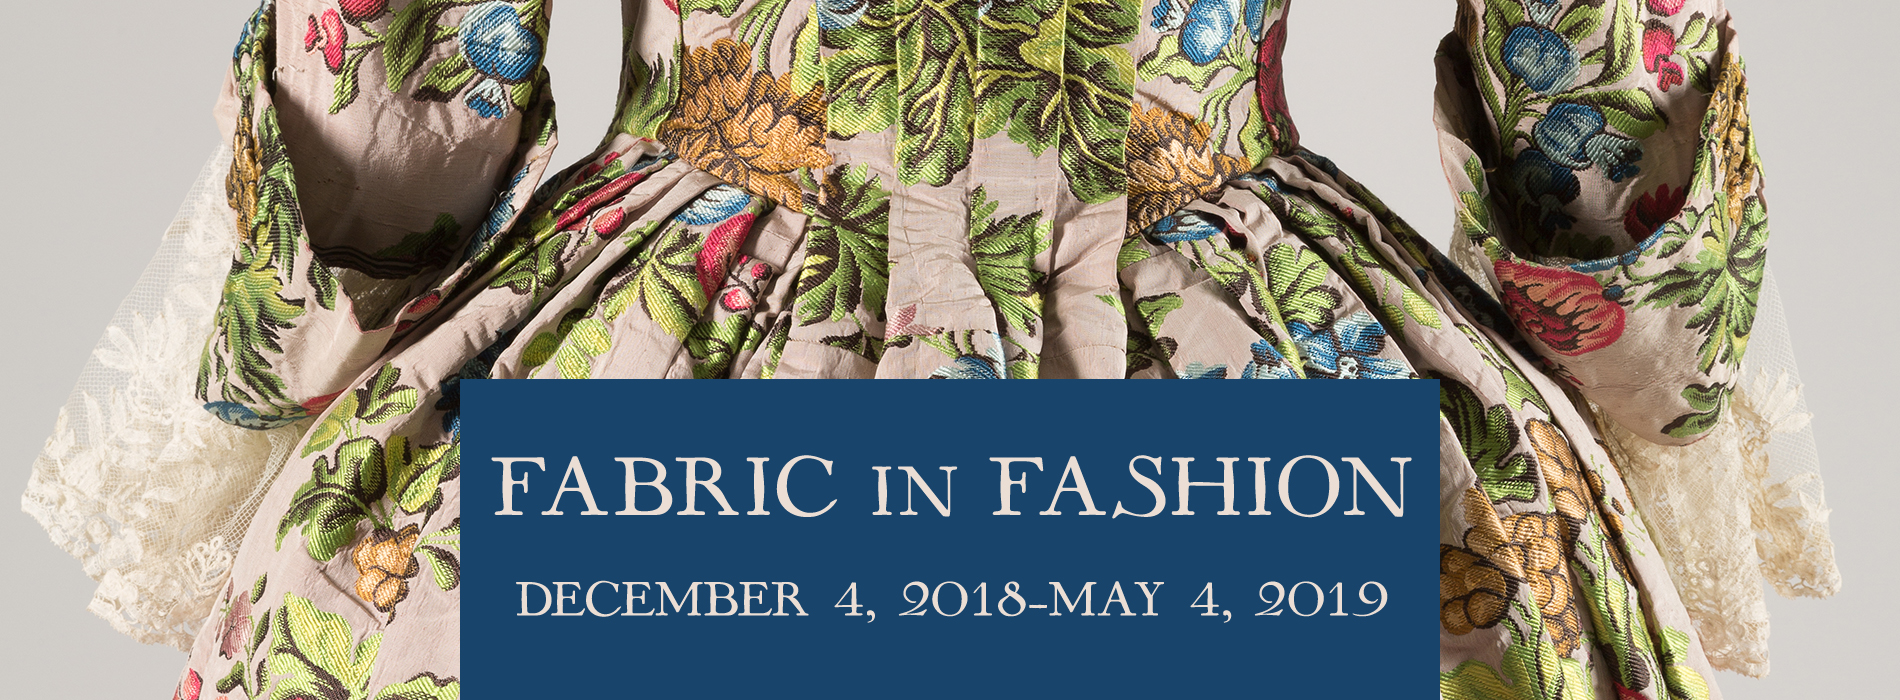 Floral brocade dress fabric with title and dates